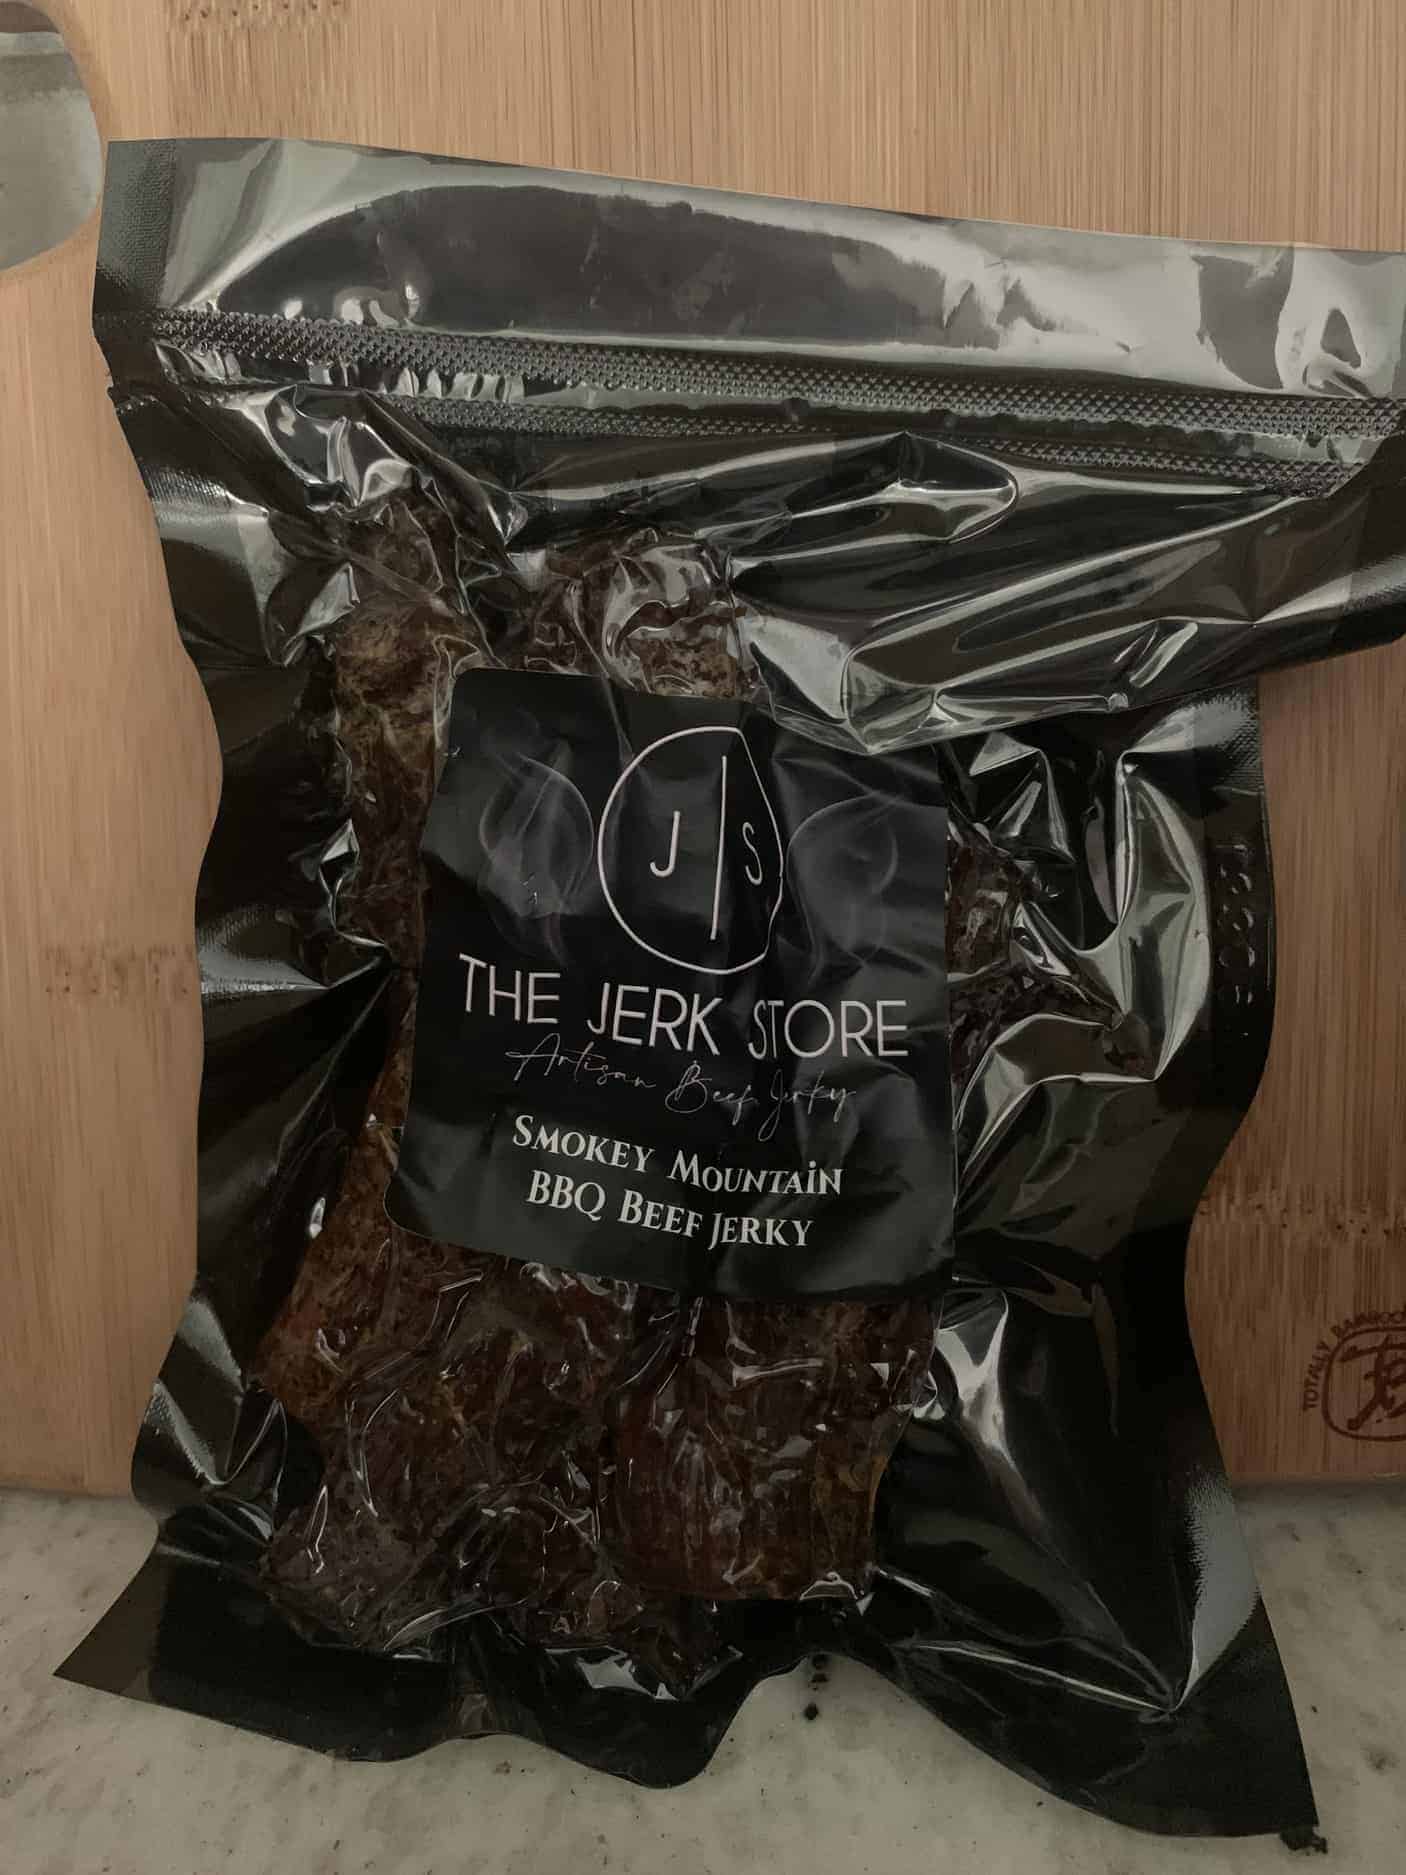 This Smokey Mountain BBQ Beef Jerky is made with love by The Jerk Store! Shop more unique gift ideas today with Spots Initiatives, the best way to support creators.